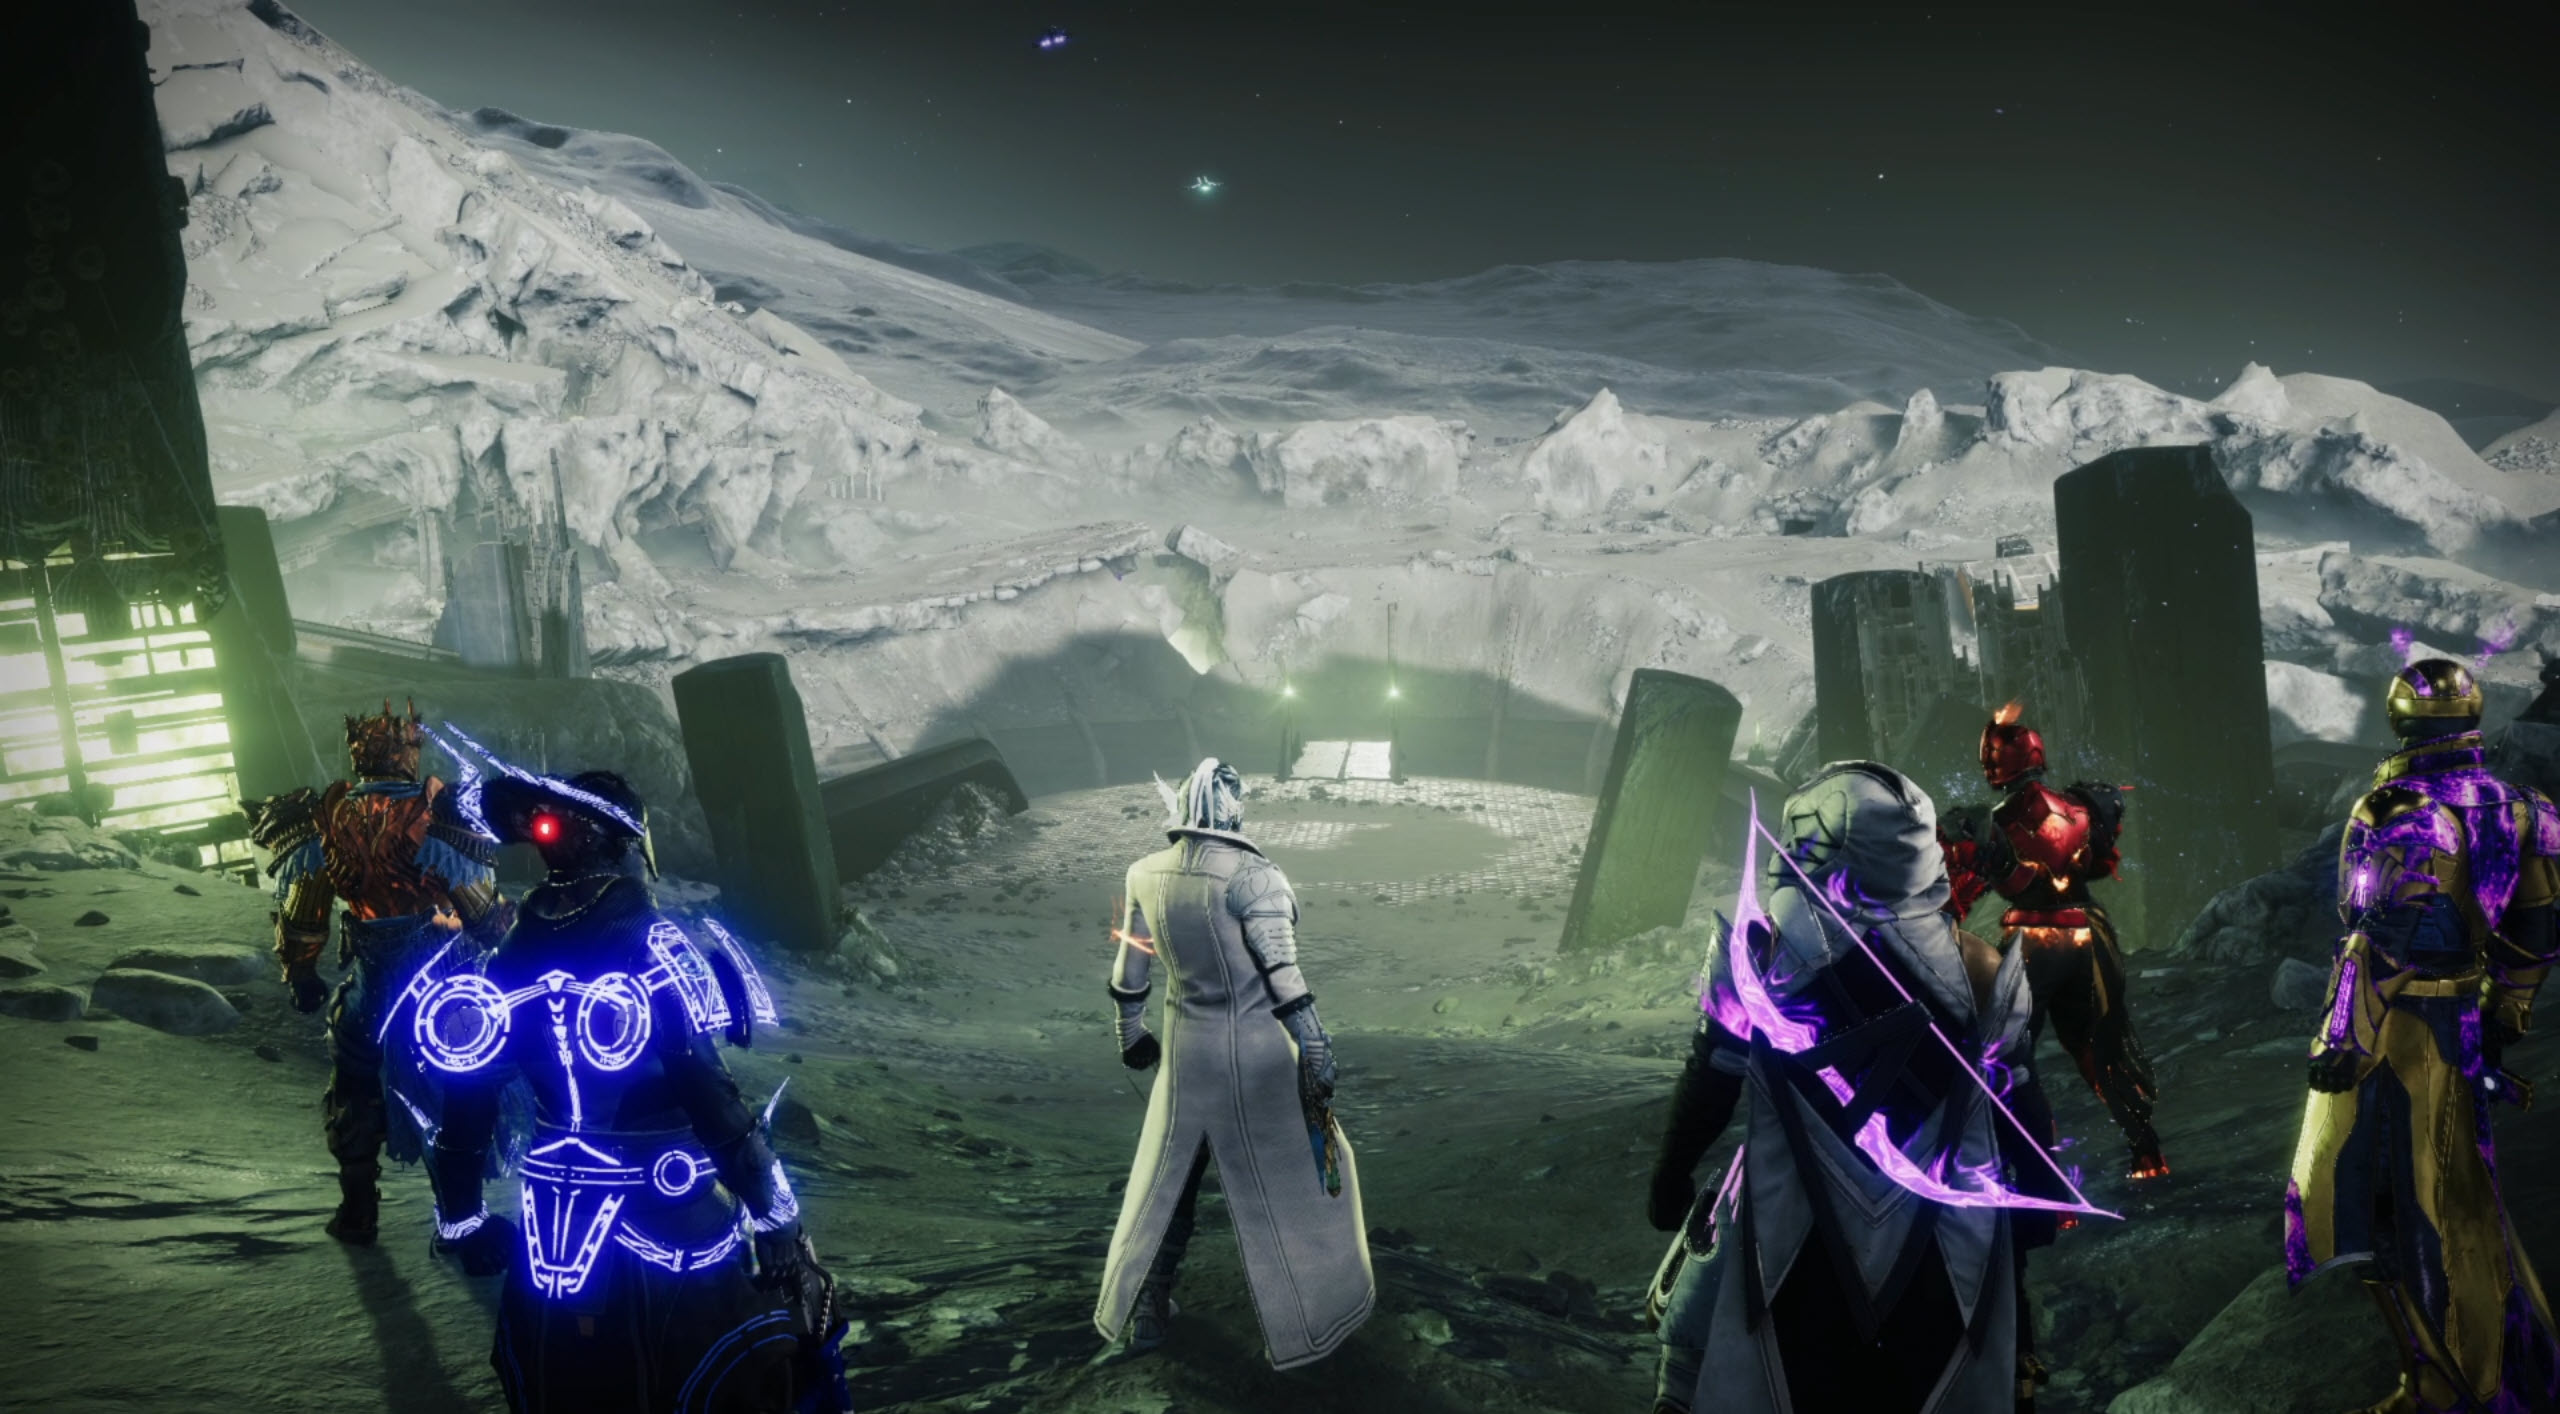 An image showing the opening of the Crota’s End raid